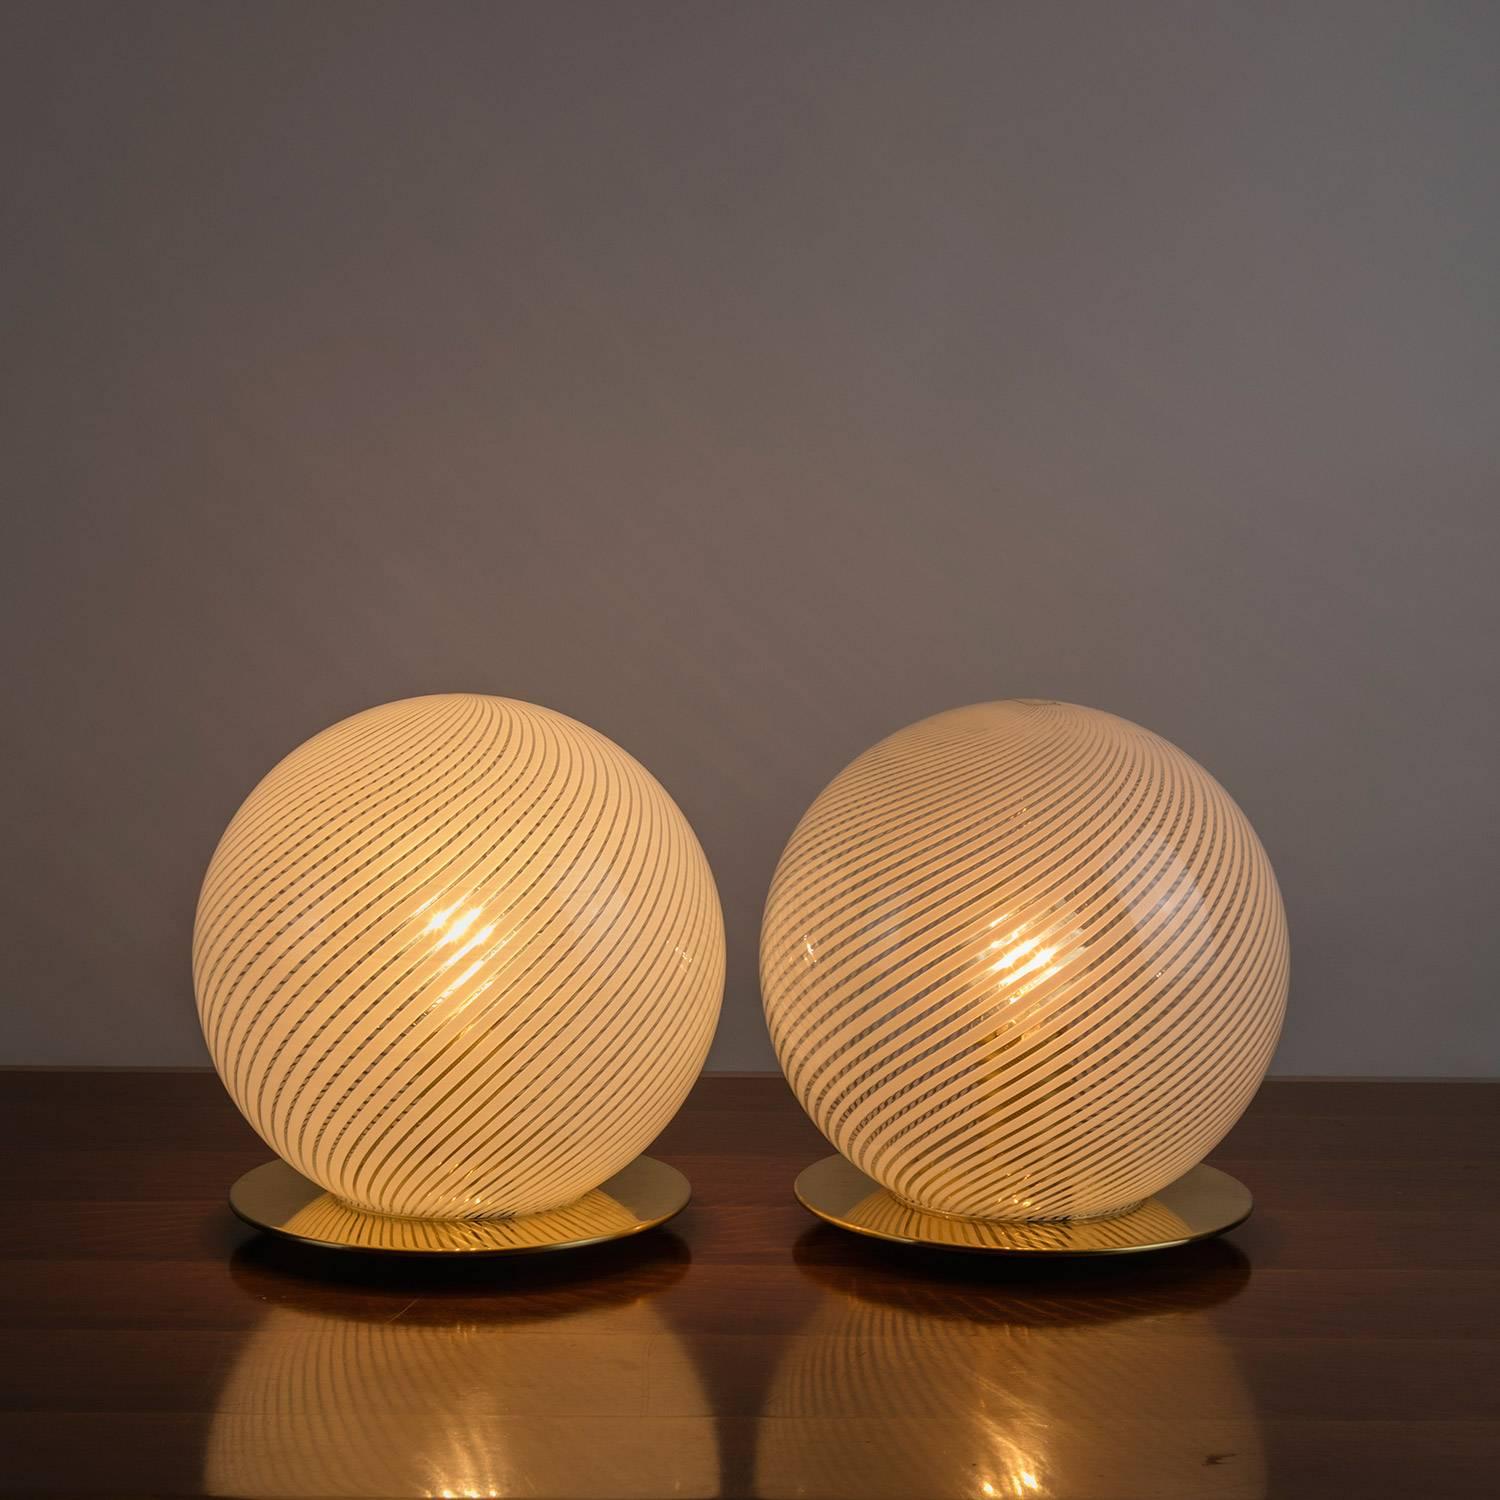 Remarkable pair of table lamps by Tronconi.
